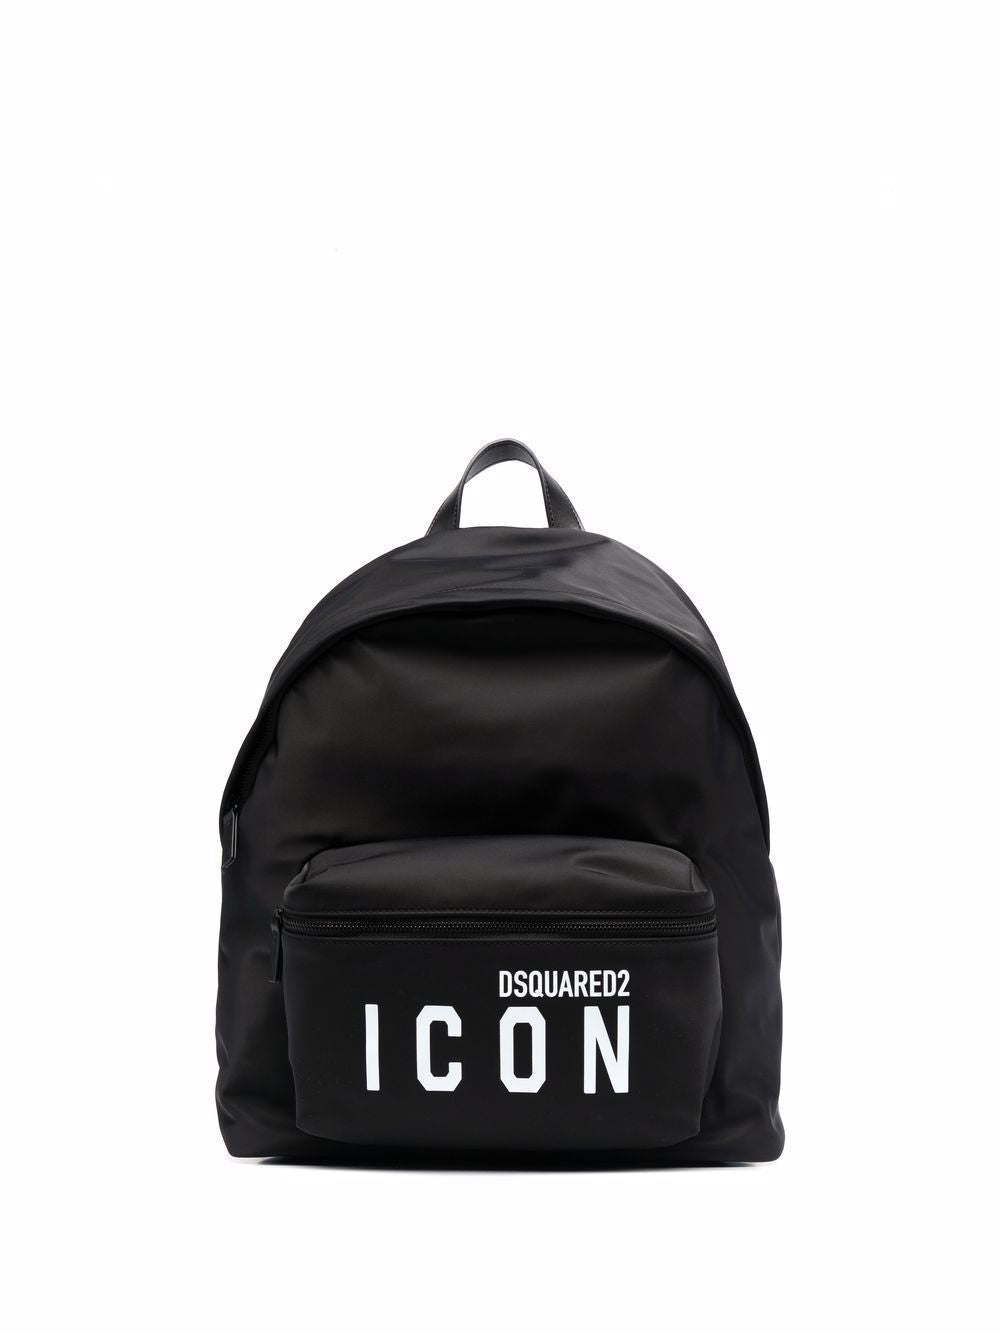 DSQUARED2 BE ICONBAGSBACKPACKS